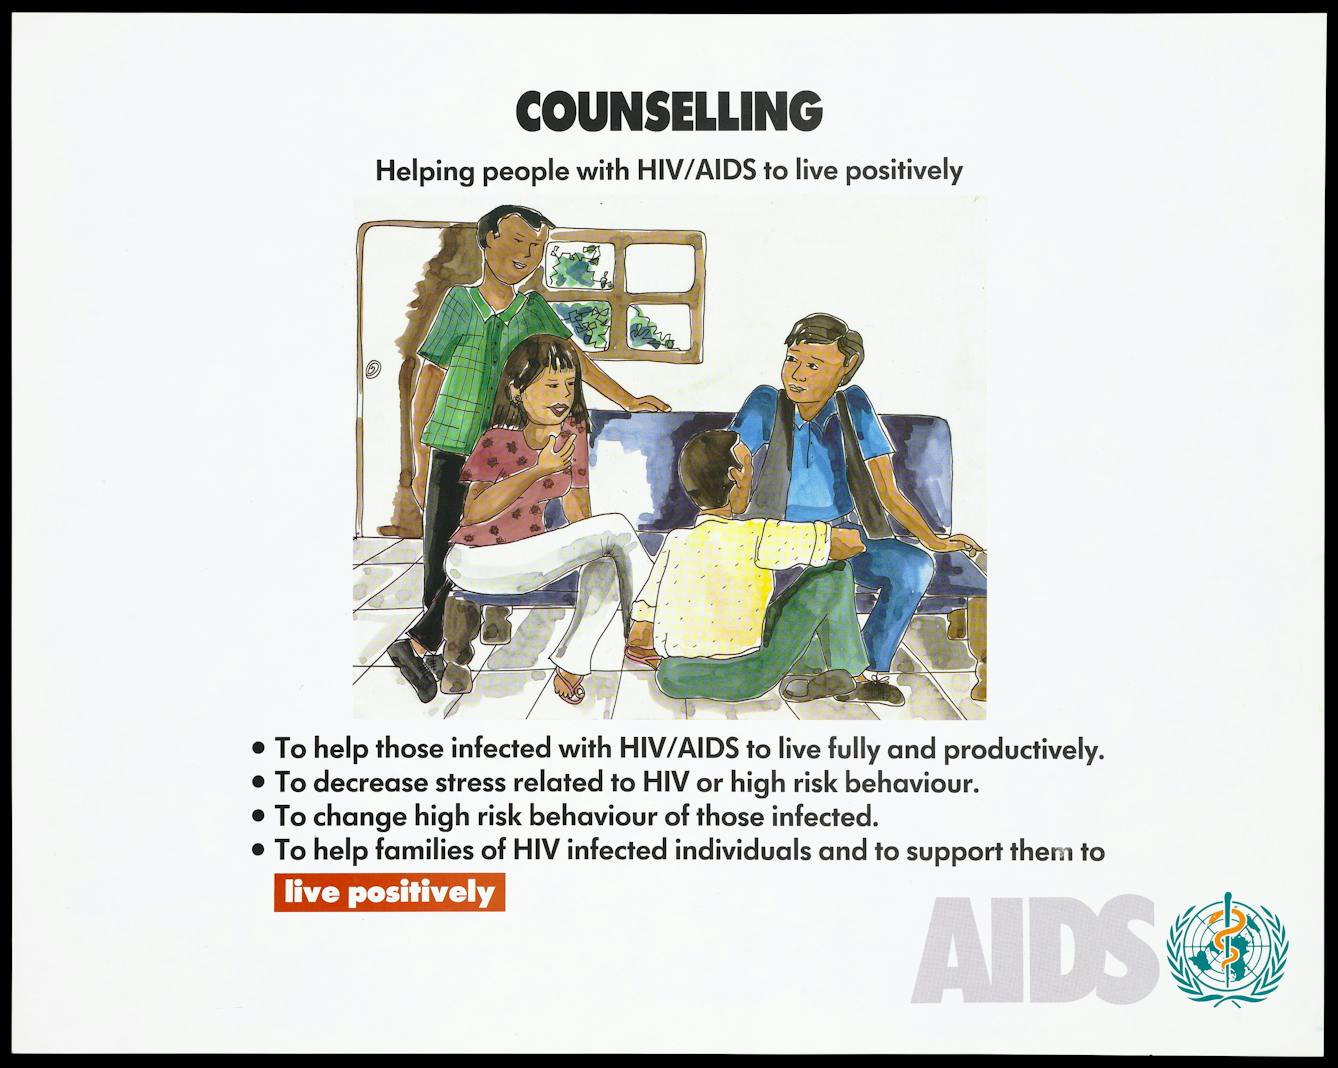 A woman and a man sitting on a sofa with a man sitting on the floor and another standing. Text reads "Counsel(l)ing. Helping people with HIVAIDS to live positively. To help those infected with HIV/AIDS ... to decrease stress ... to change high risk behaviour ... to help families of HIV infected individuals ... AIDS."